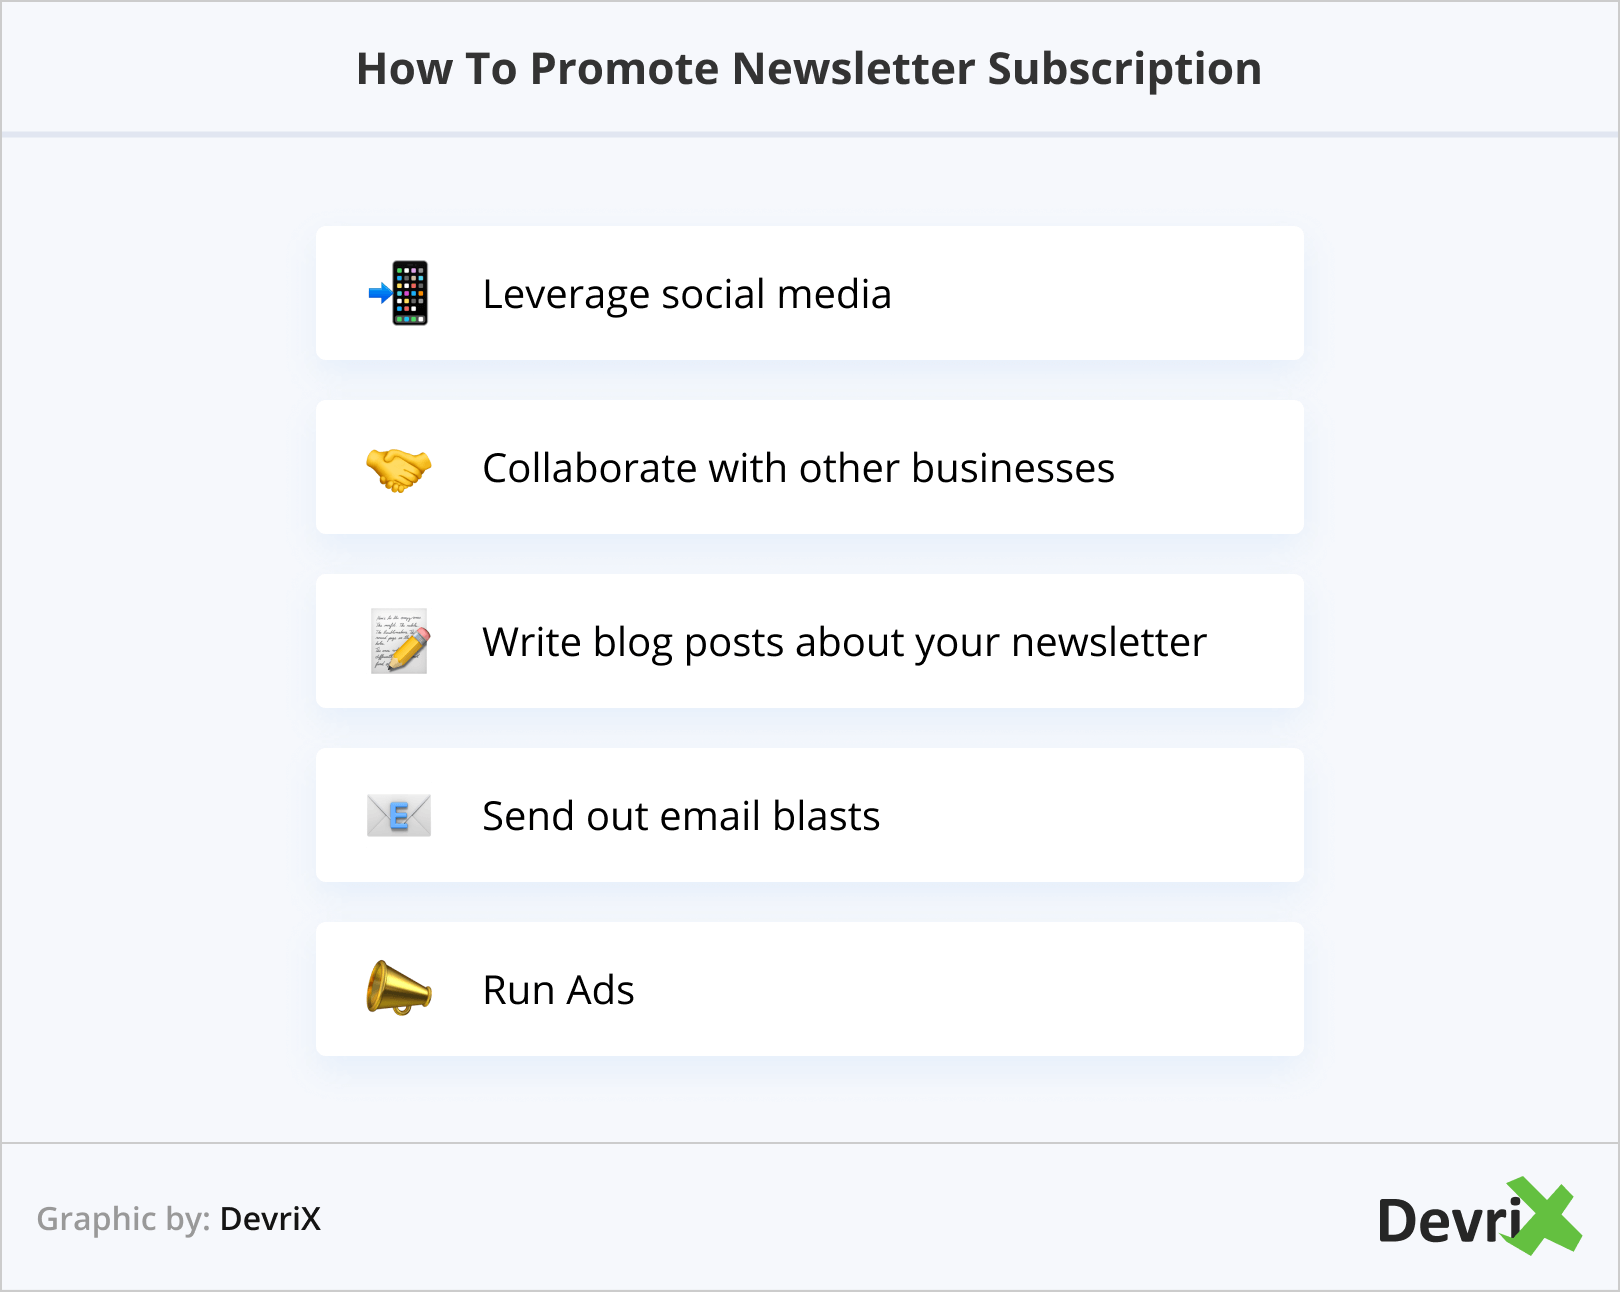 How To Promote Newsletter Subscription